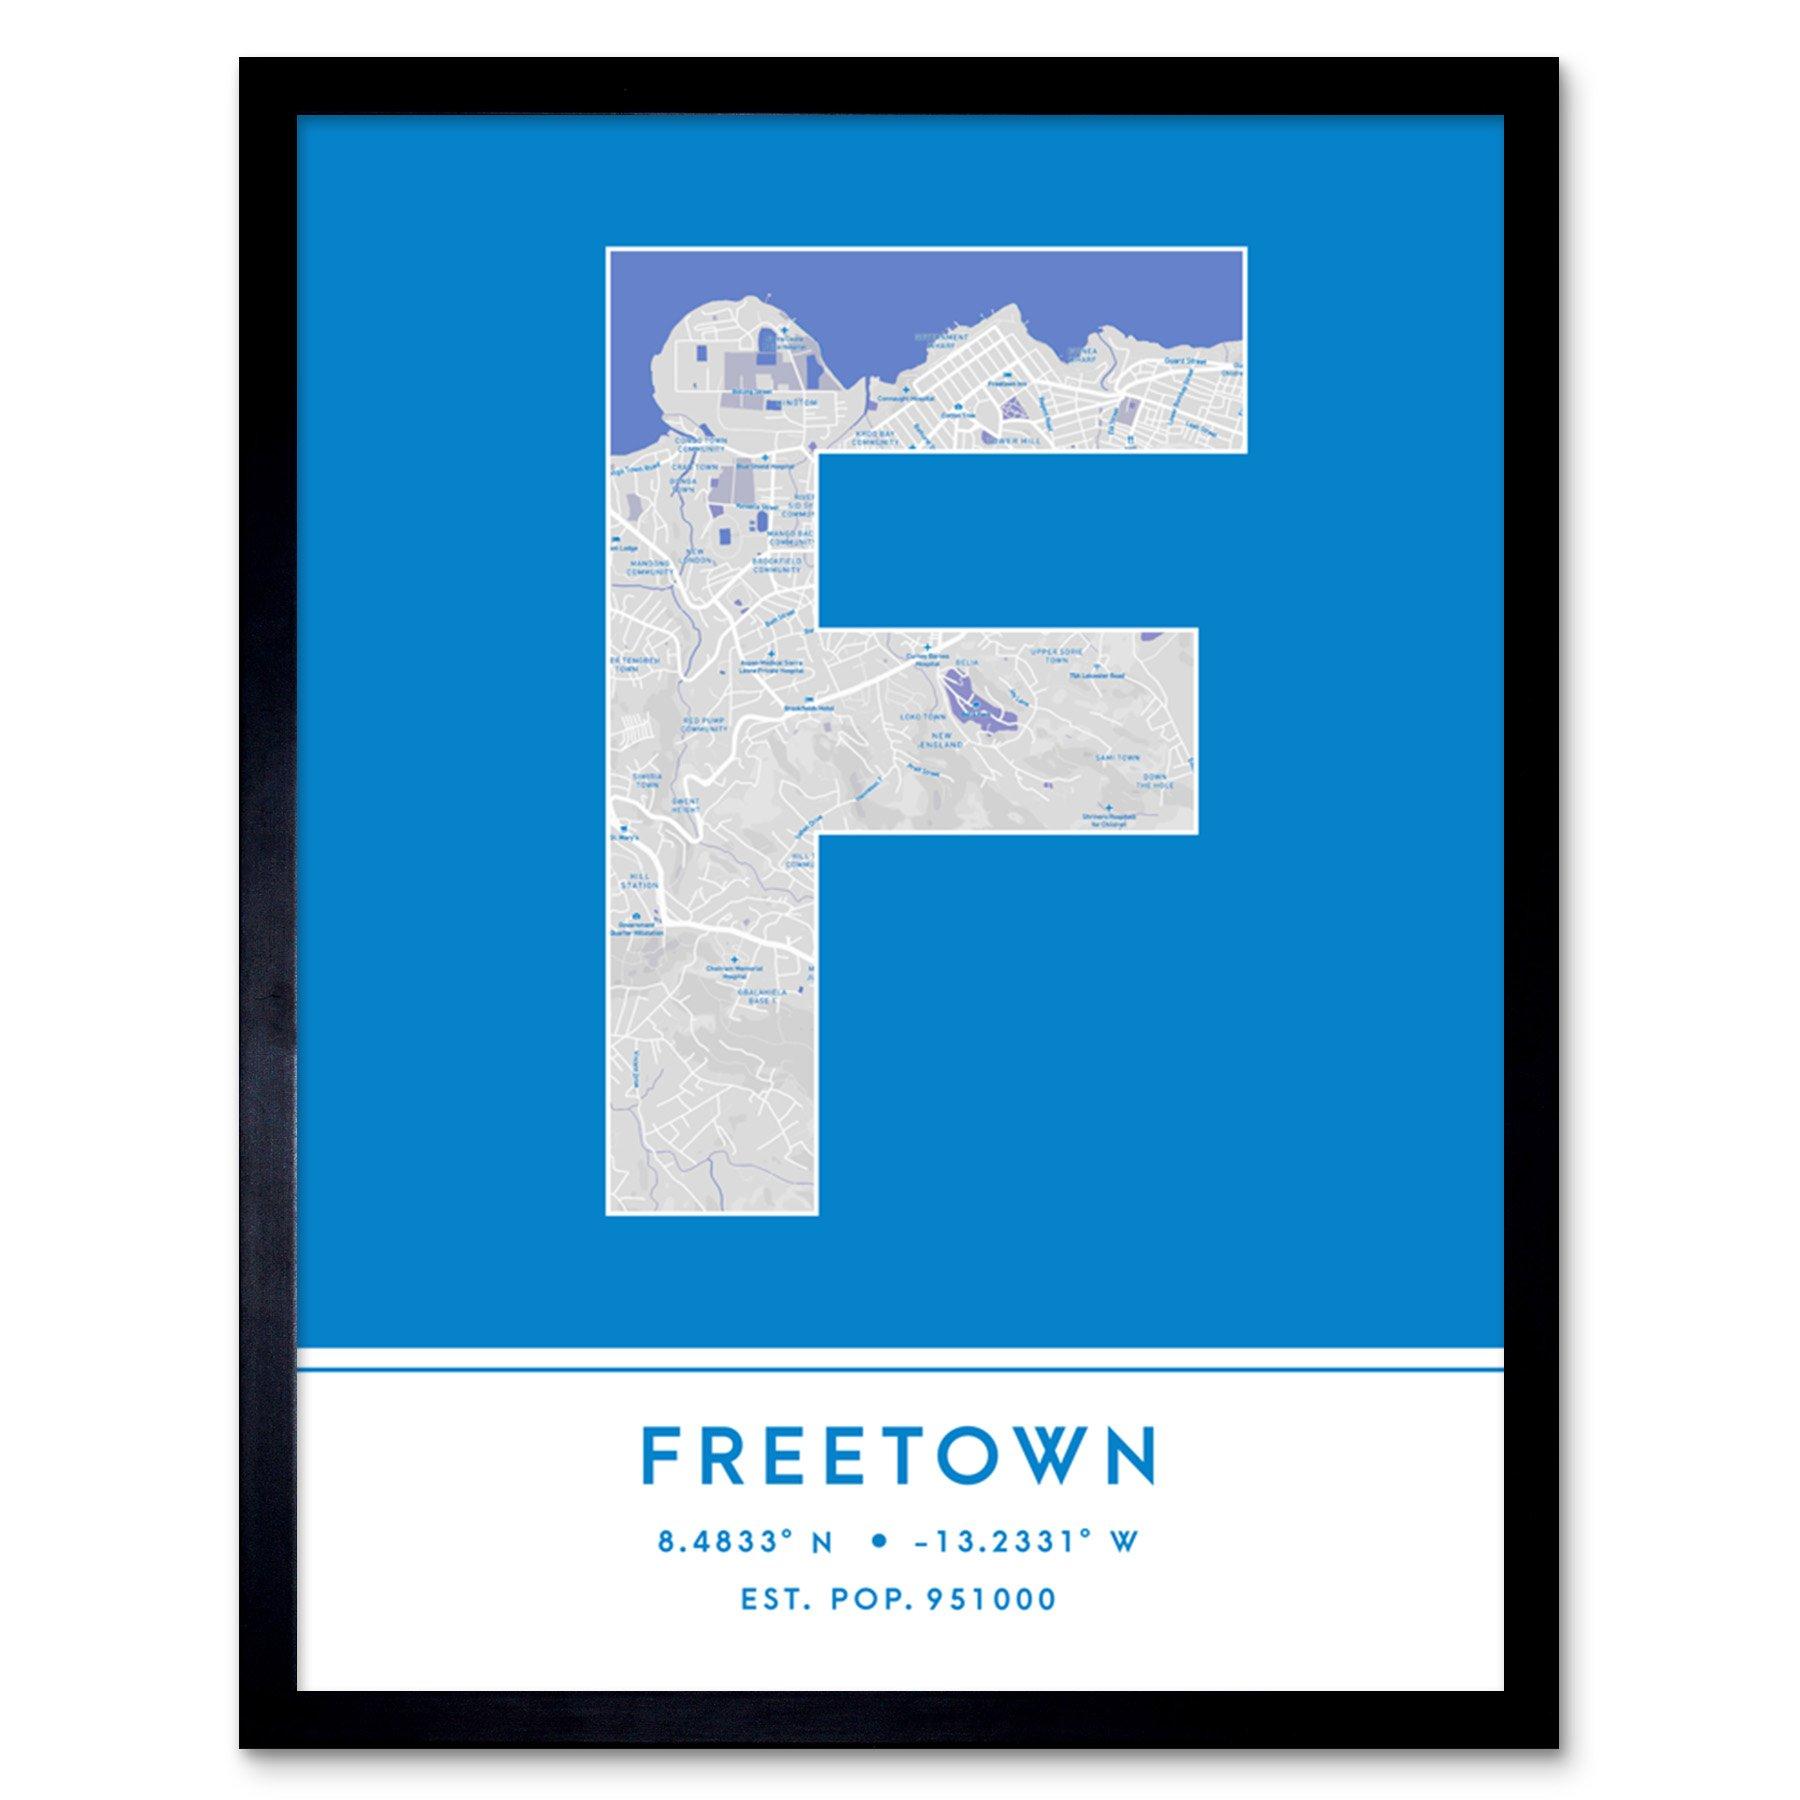 Freetown Sierra Leone City Map Modern Typography Stylish Letter Framed Word Wall Art Print Poster for Home Décor